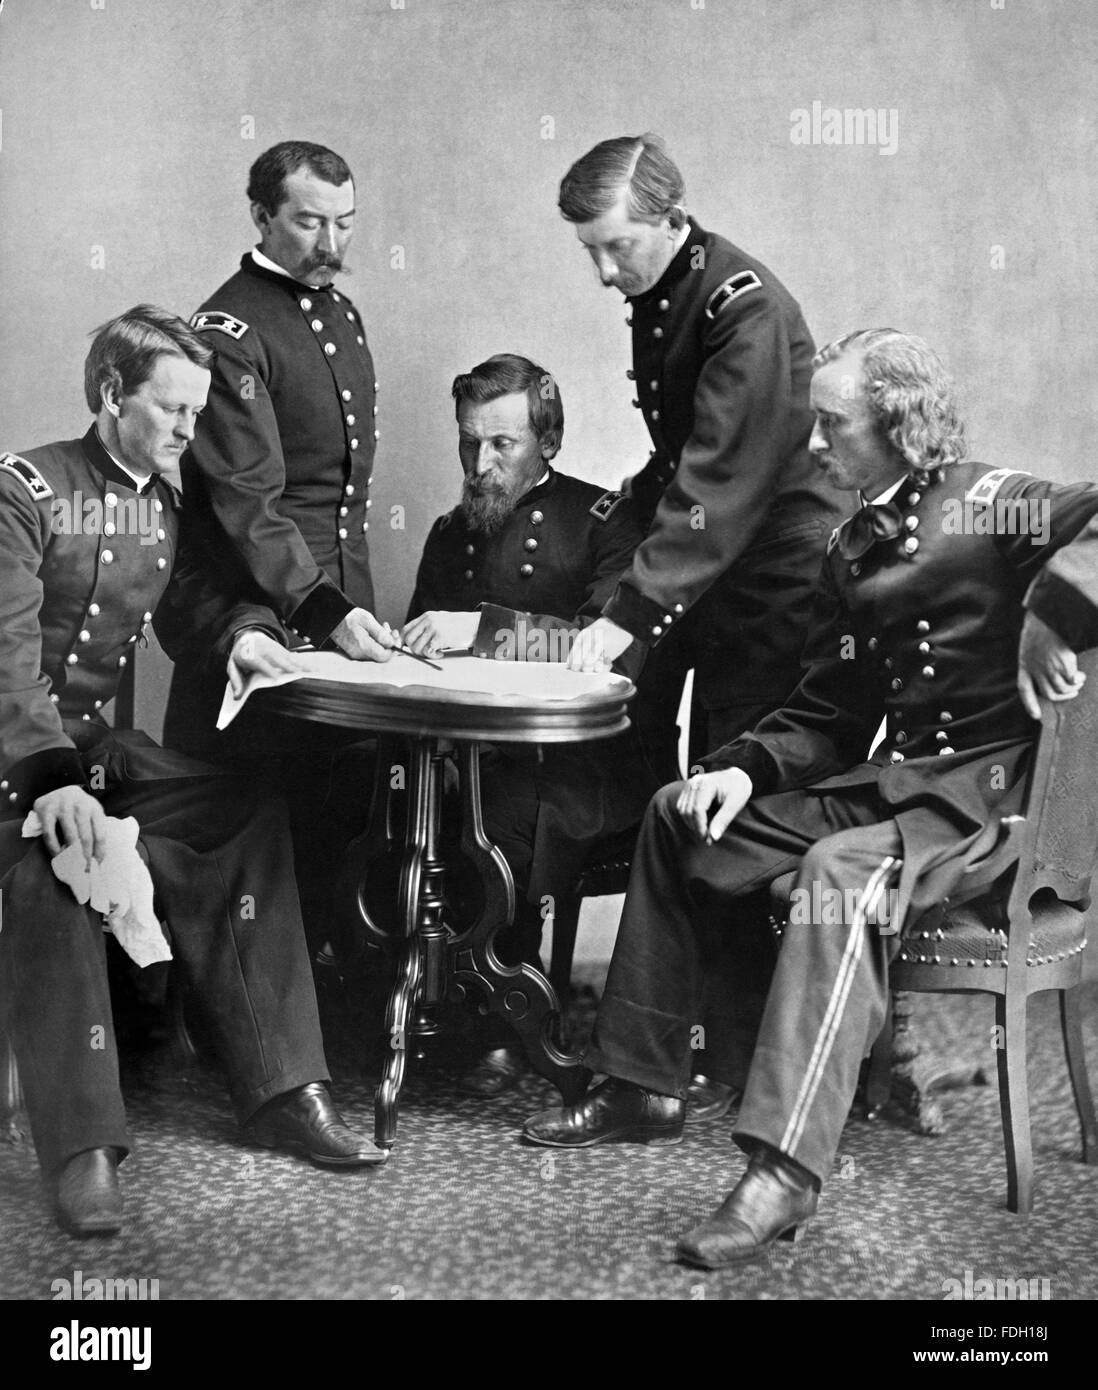 American Civil War photograph showing Union Army Generals Wesley Merritt, Philip Sheridan, George Crook, James William Forsyth, and George Armstrong Custer. First published in Harper's Weekly, June 24 1865 Stock Photo